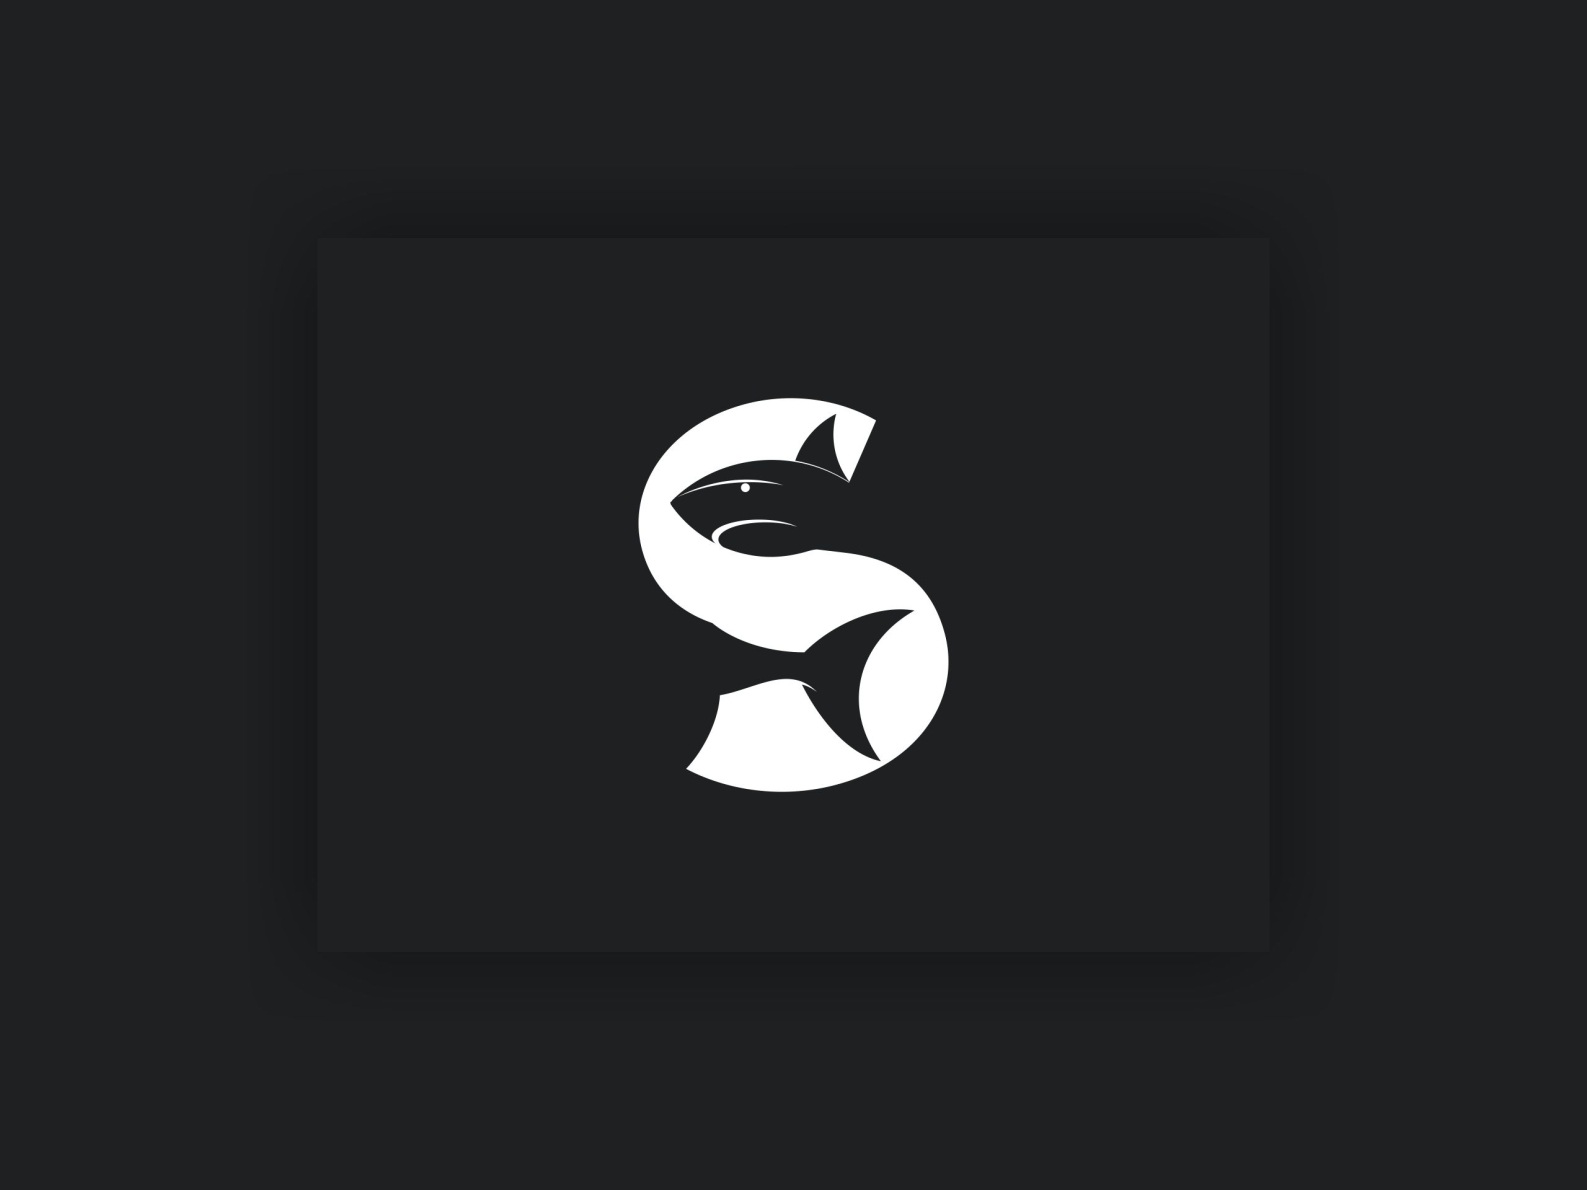 Letter S Shark Logo by Agung D. Cahyono on Dribbble